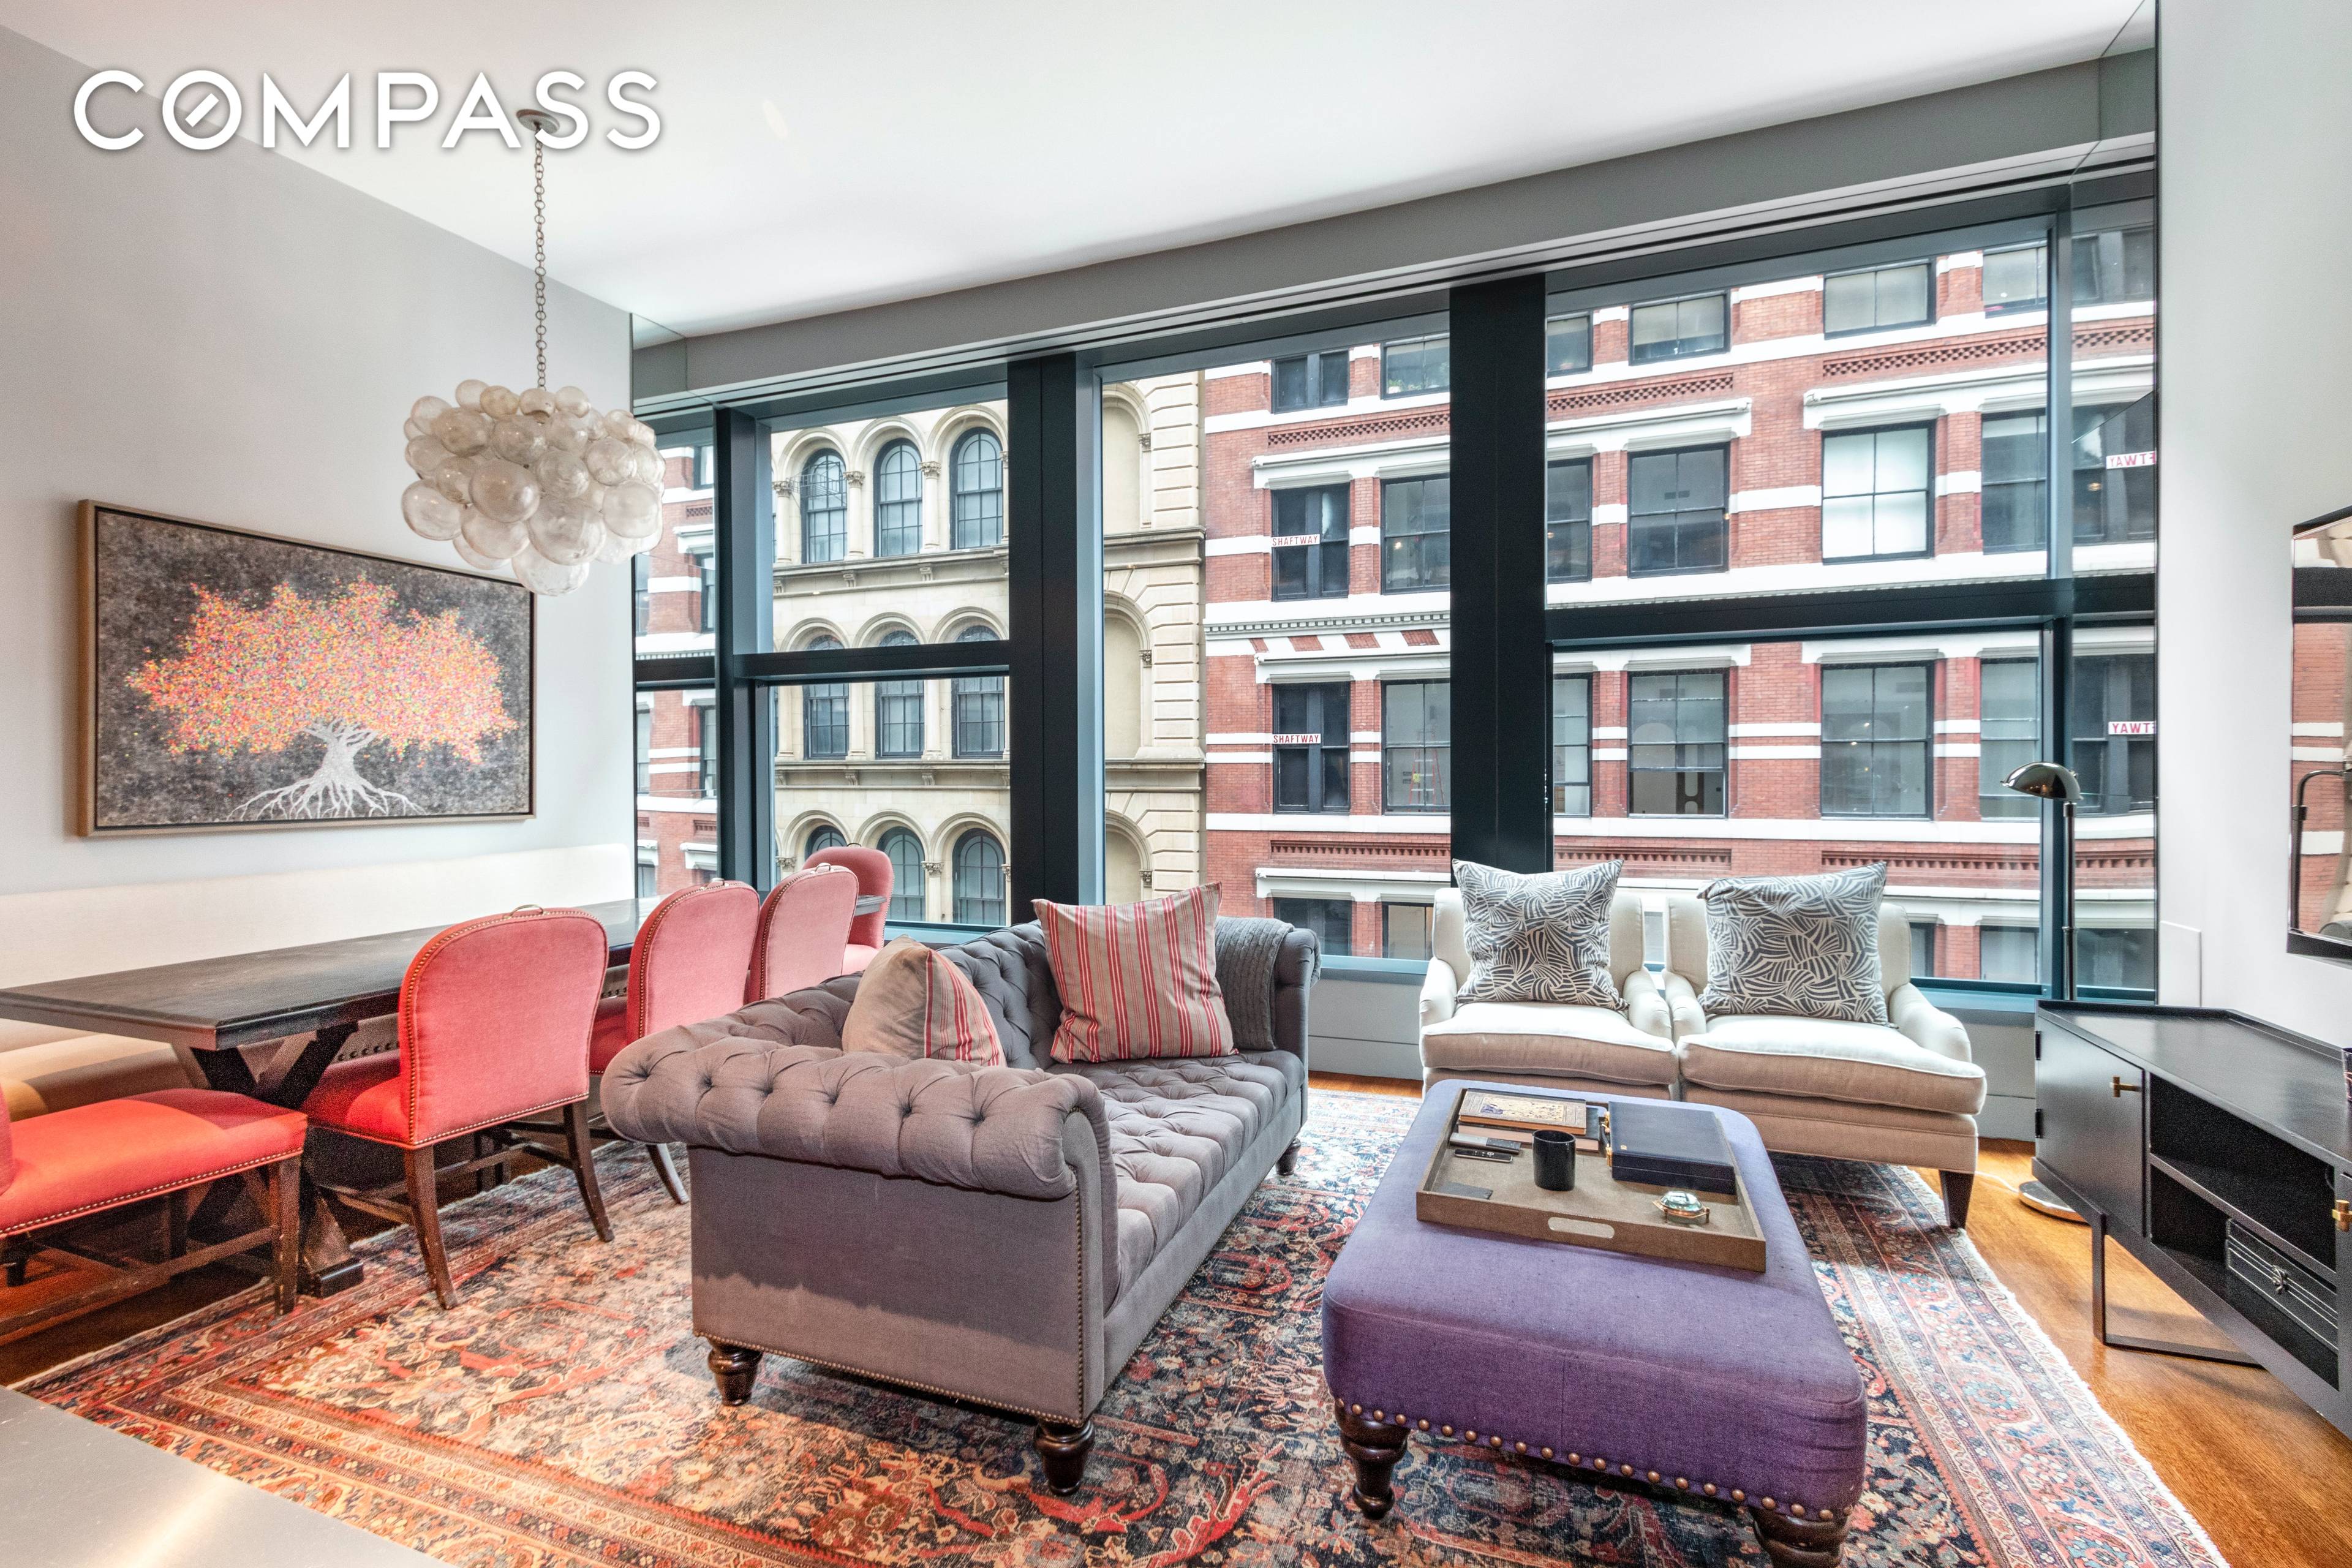 RARELY AVAILABLE, 1 BEDROOM PLUS LIBRARY AT THE STAR STUDDED 40 MERCER STREET Enjoy the amenities of a 5 star hotel in this stunning full service luxury building.